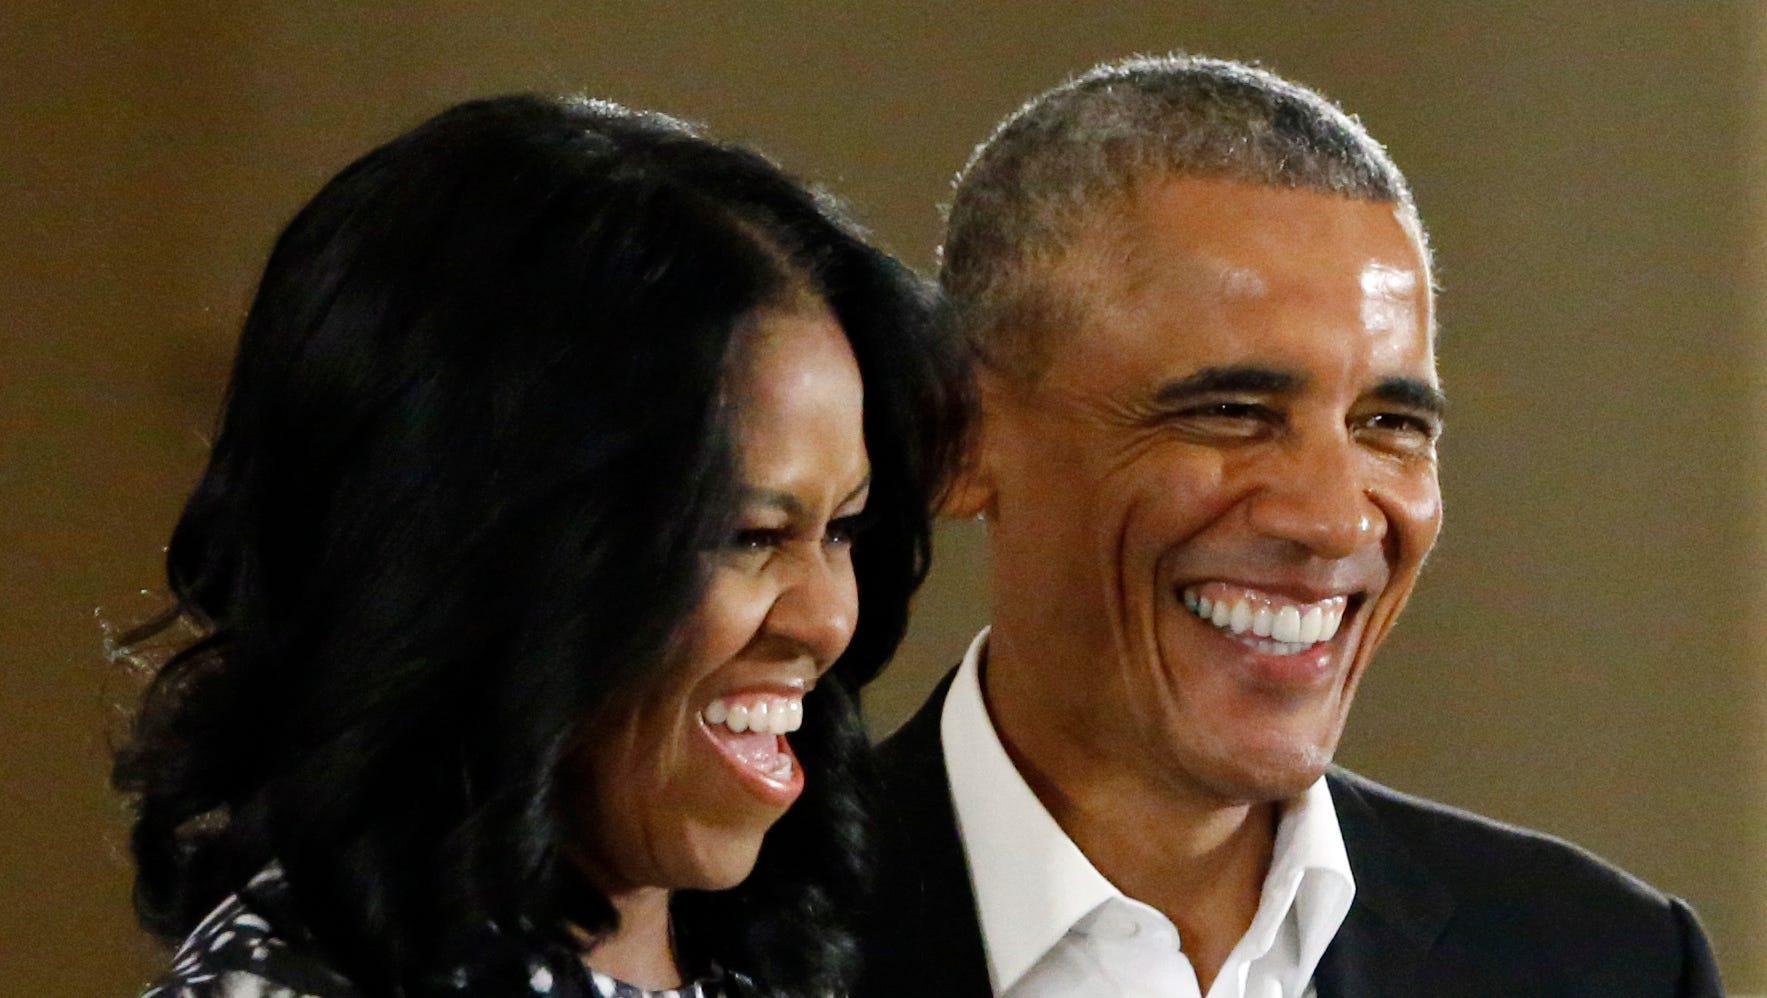 Netflix Partners With Barack Michelle Obama For Series And Films